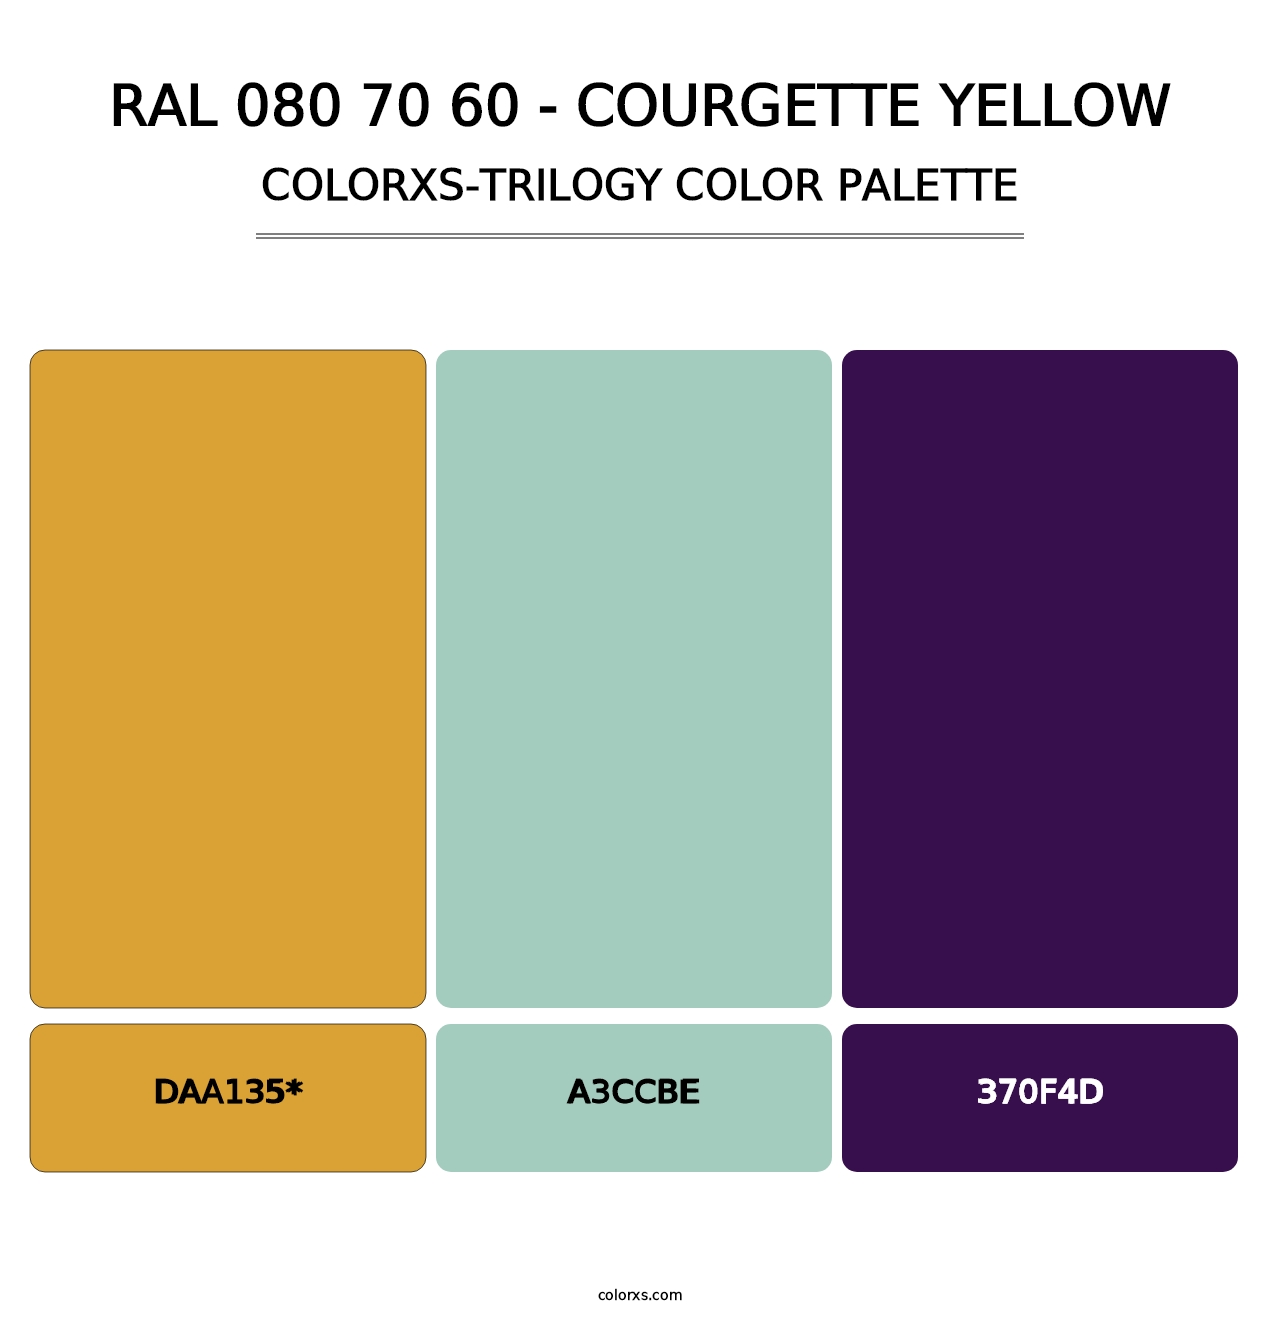 RAL 080 70 60 - Courgette Yellow - Colorxs Trilogy Palette